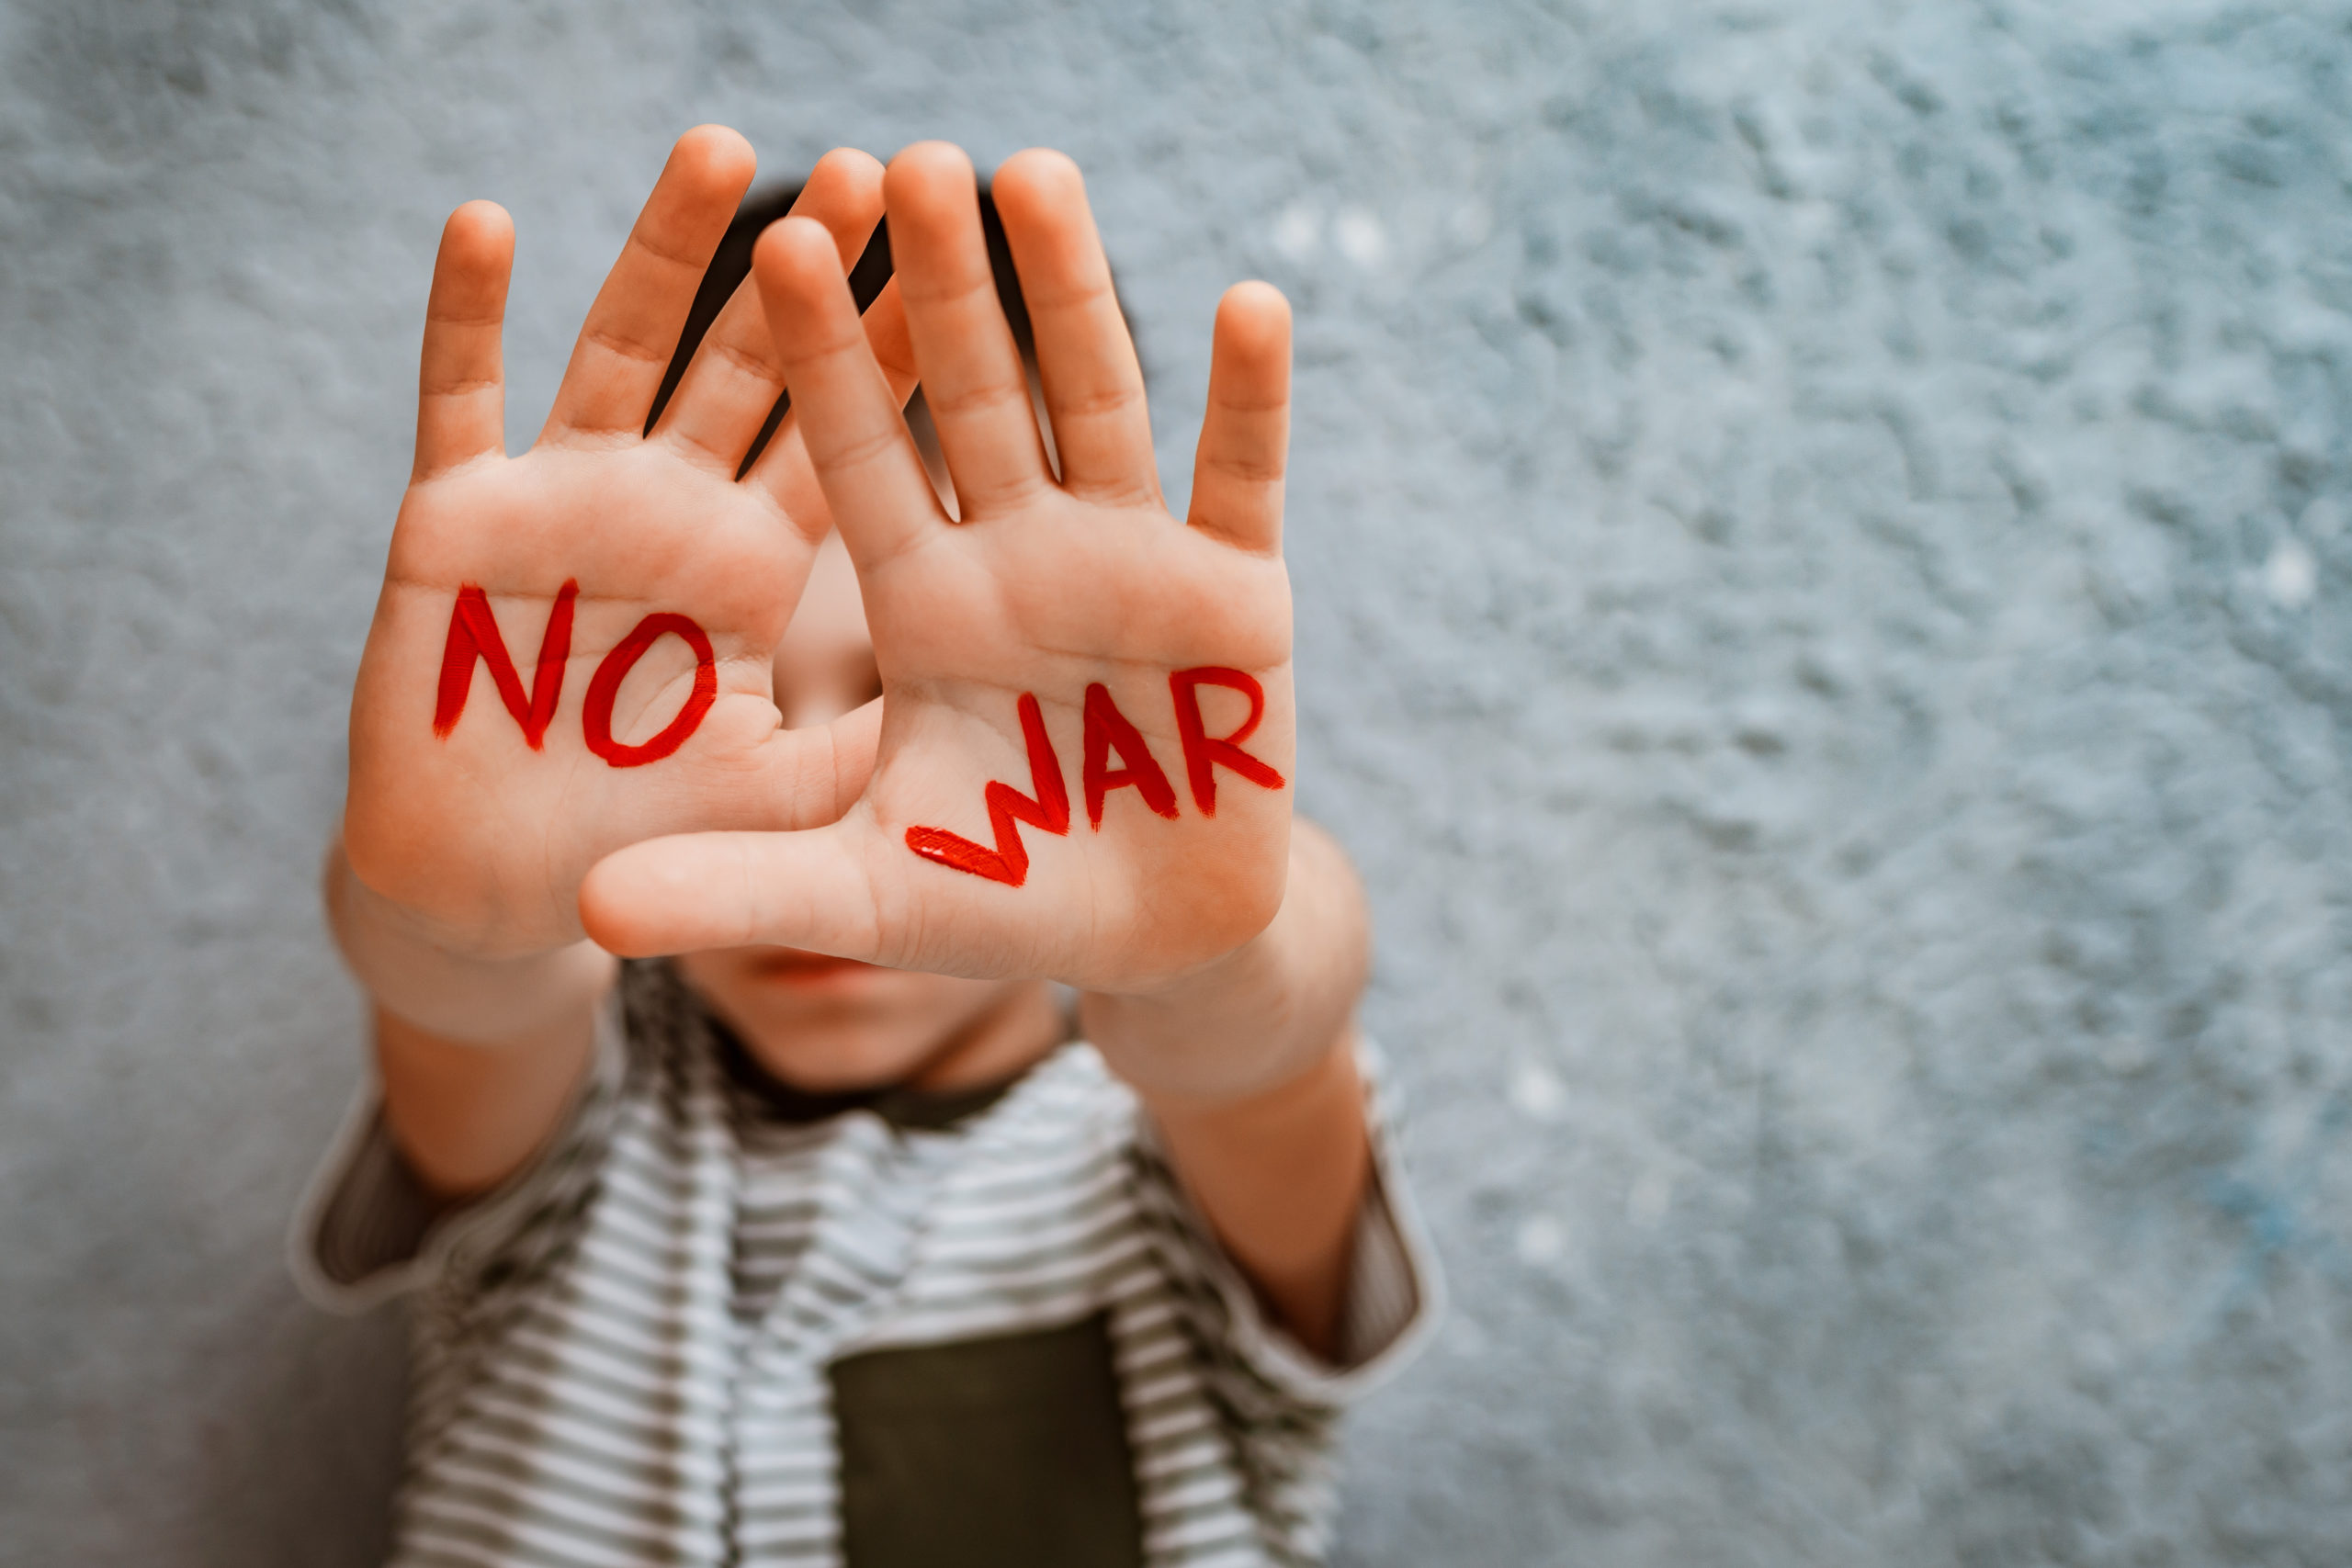 slogan of peace without war is written on the child’s hand in red no war.